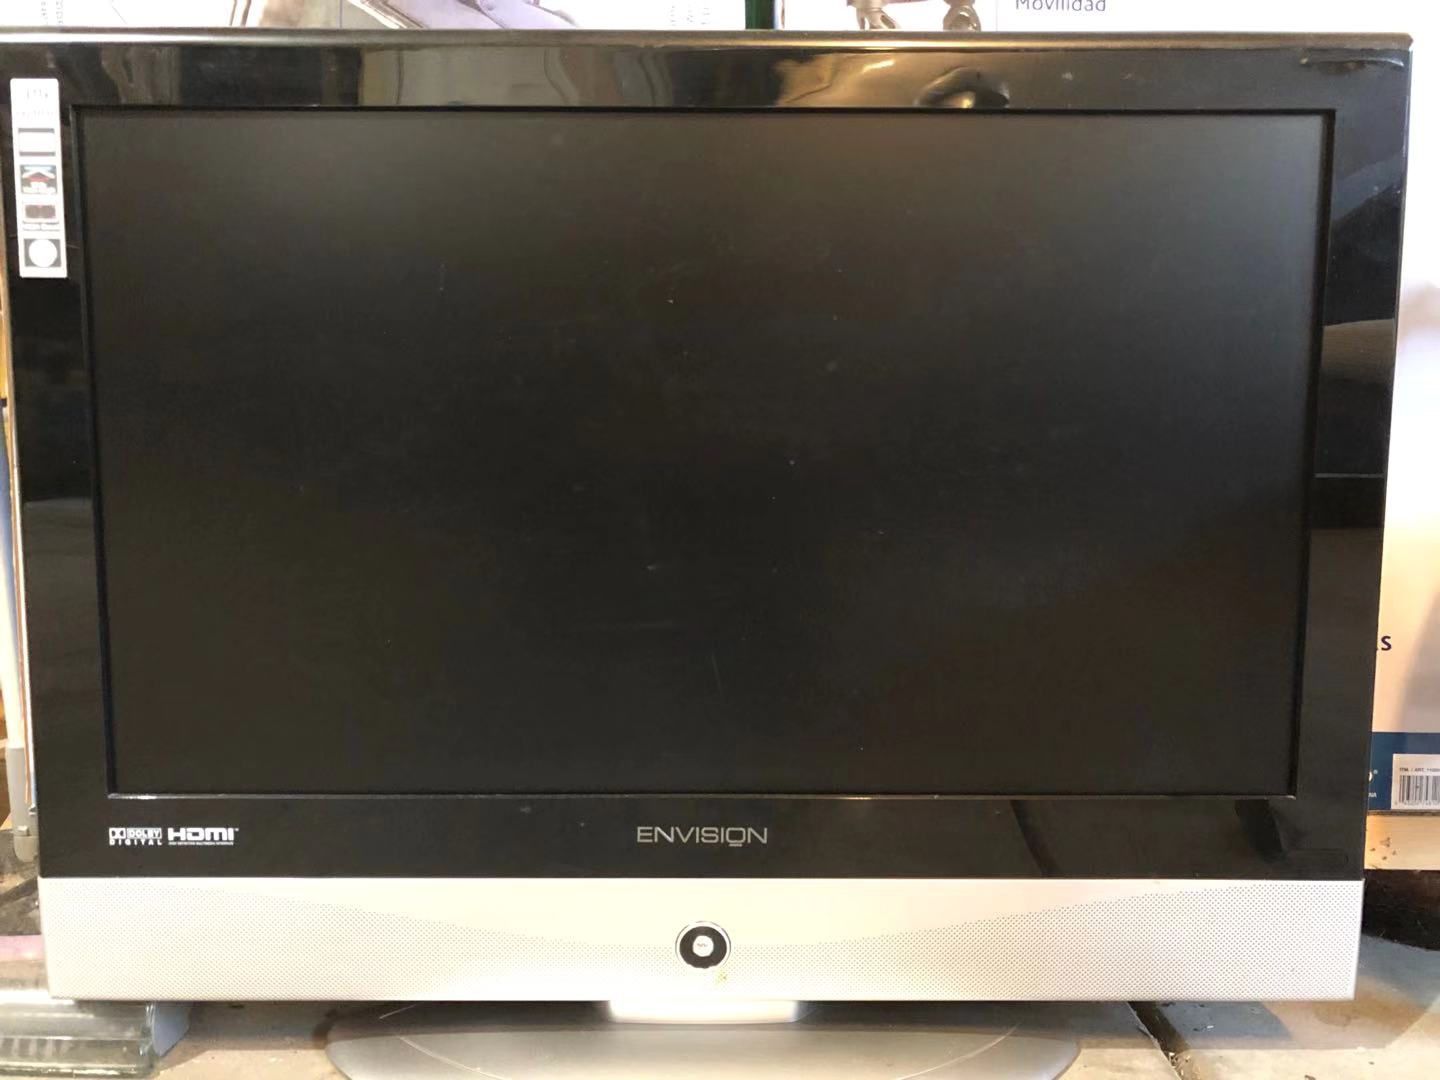 Envision 32” LCD tv